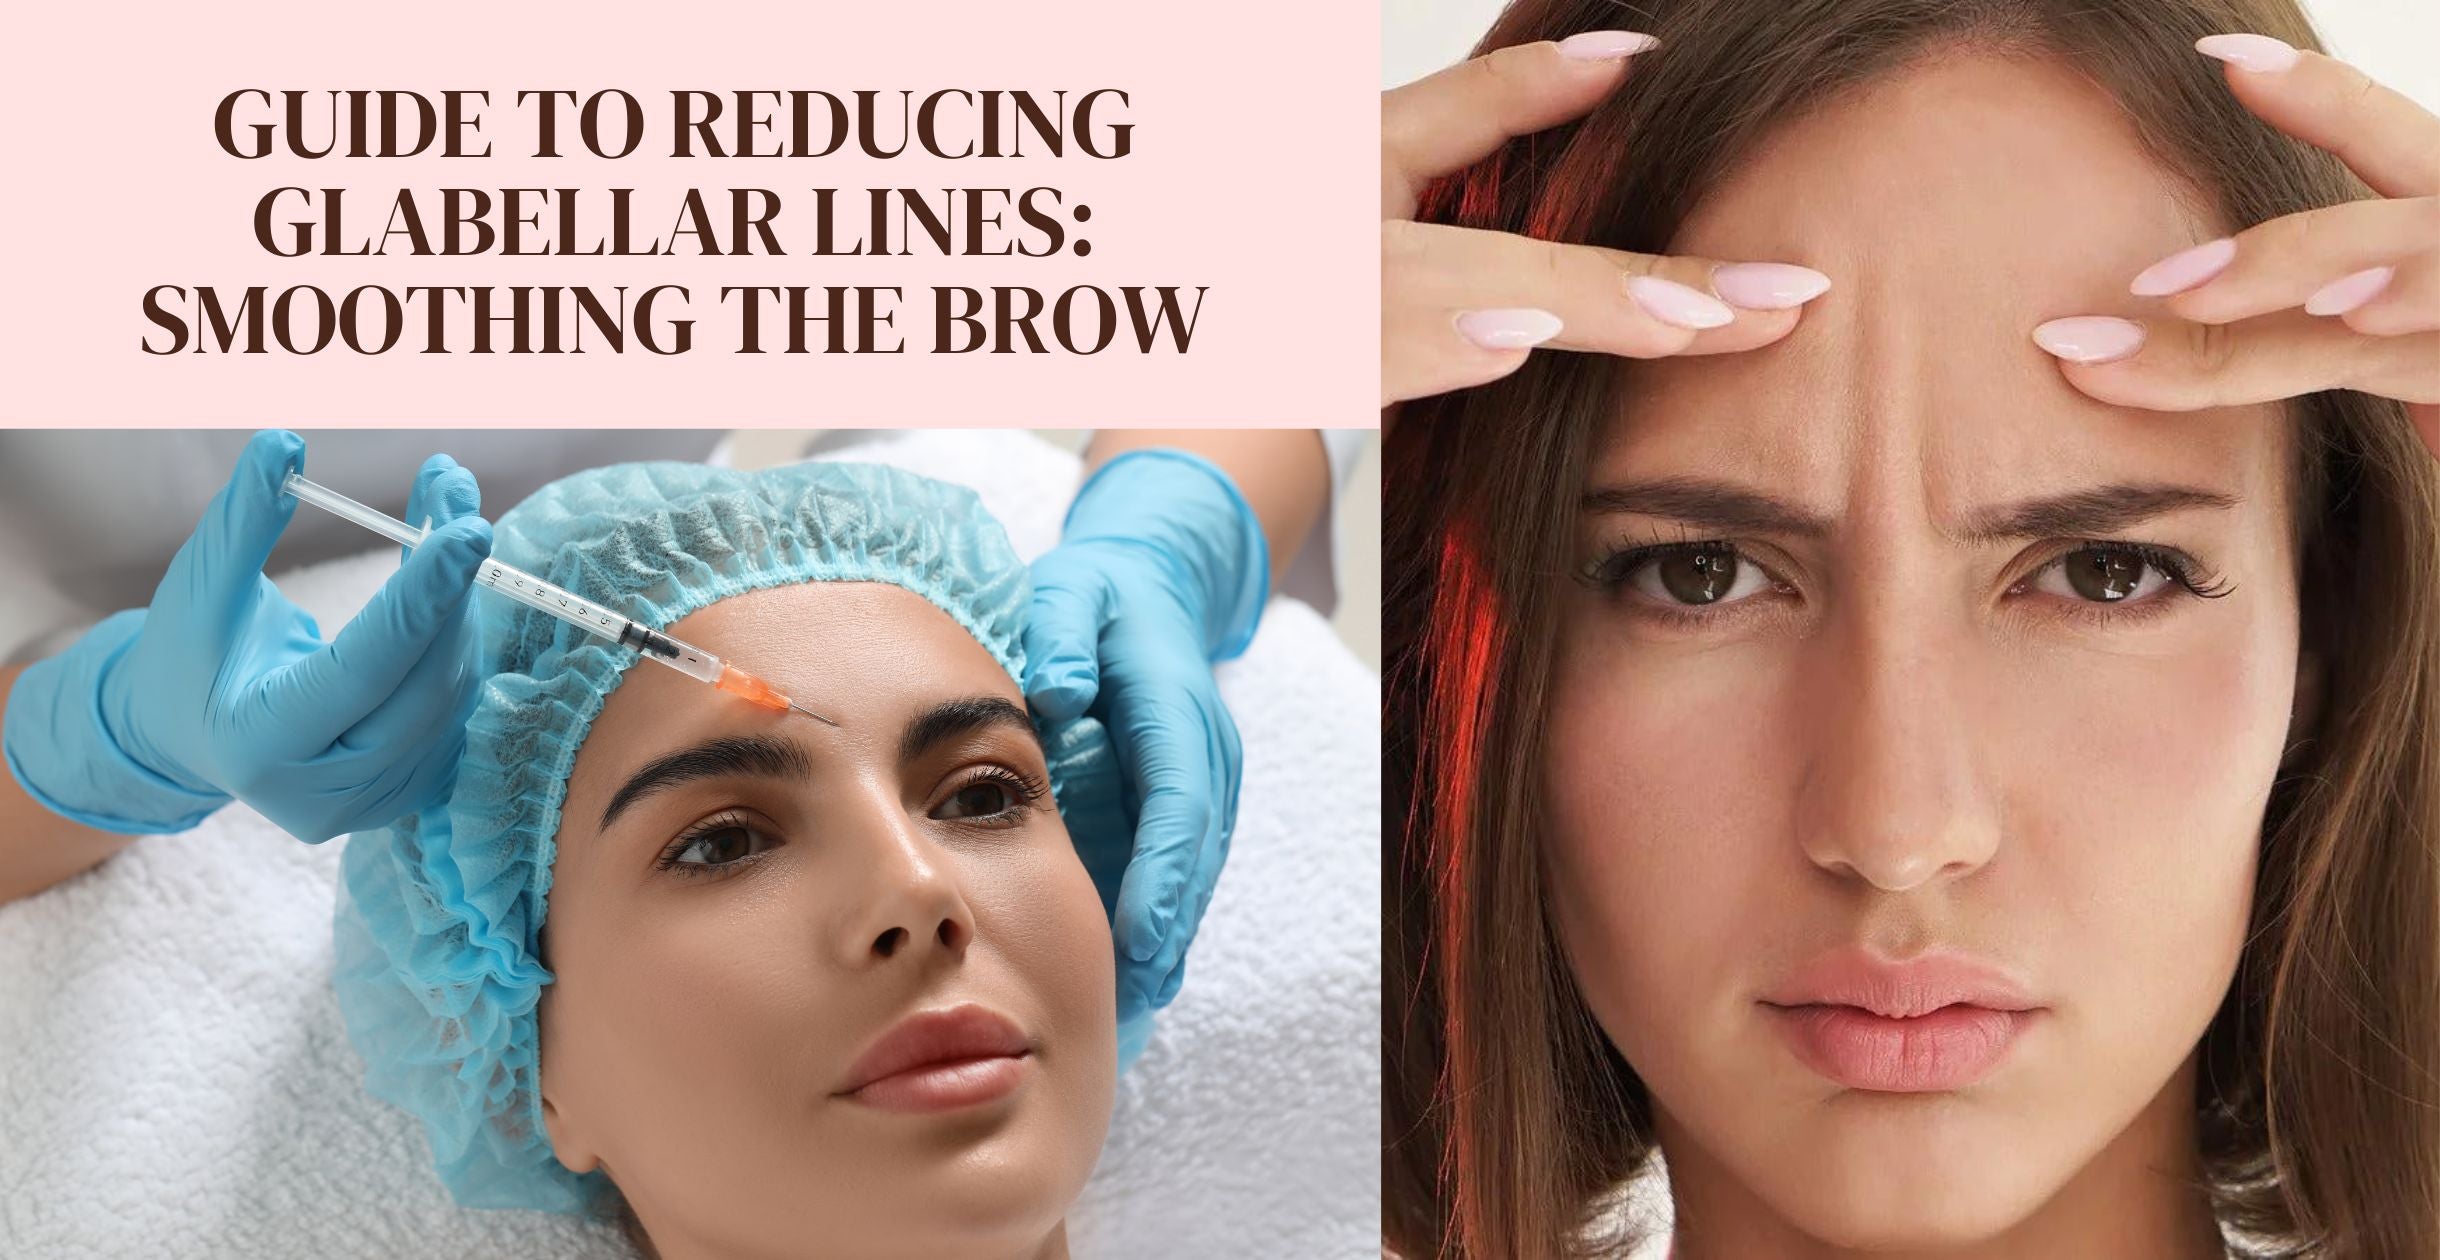 Guide to Reducing Glabellar Lines: Smoothing the Brow